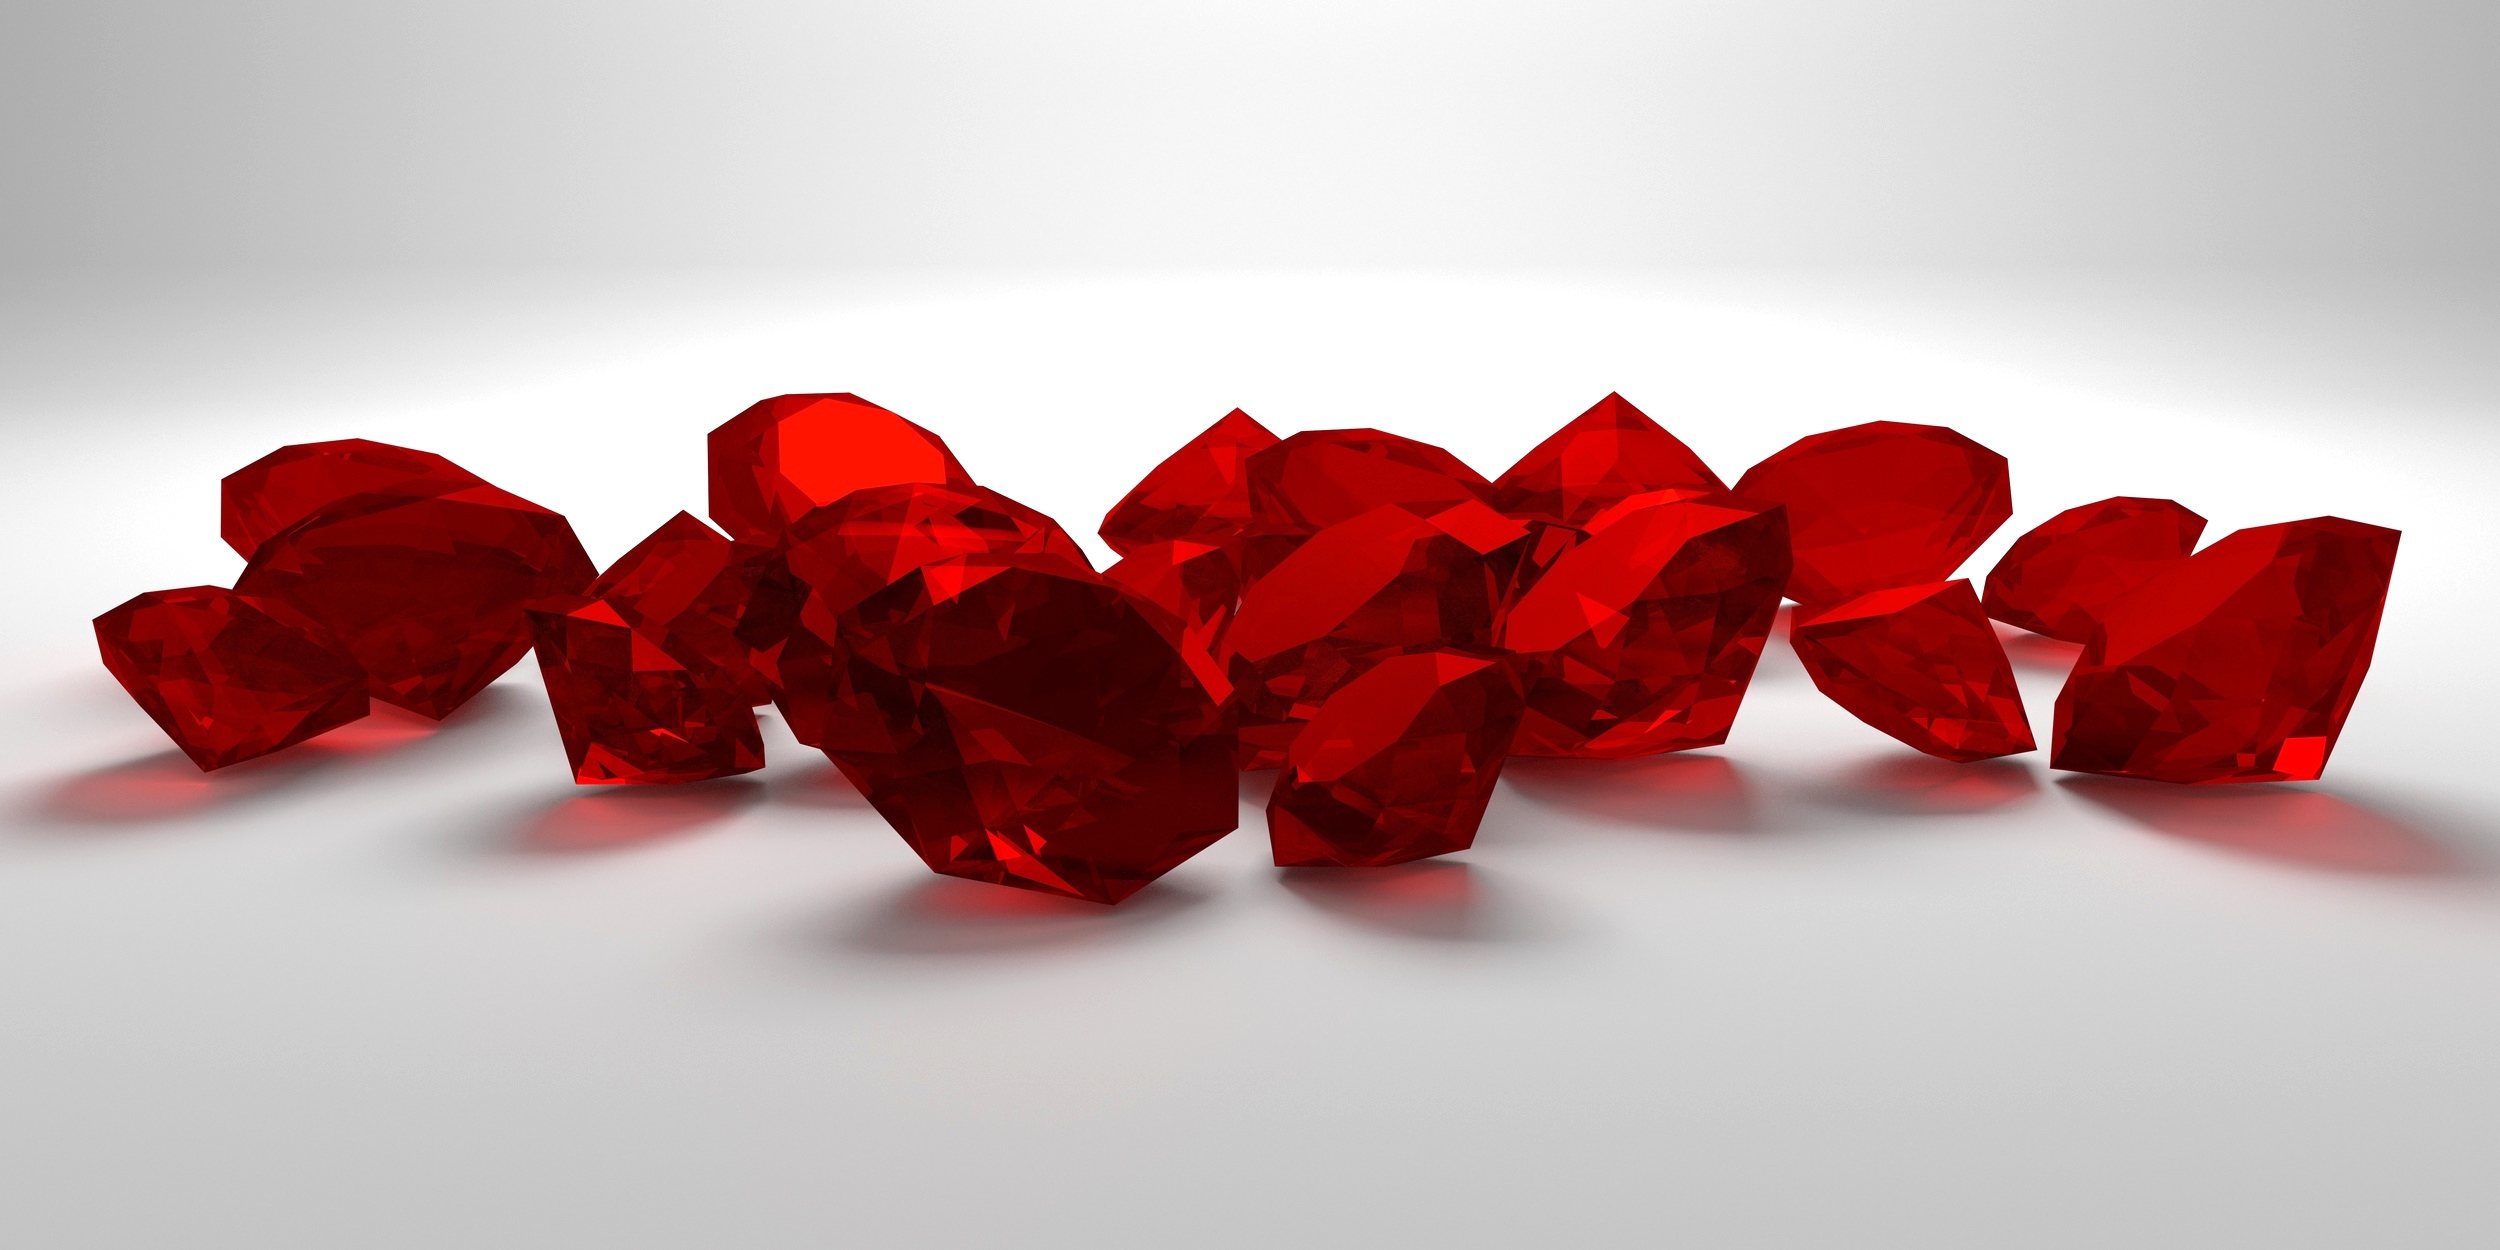 16 Facts About Rubies and Their Folklore!